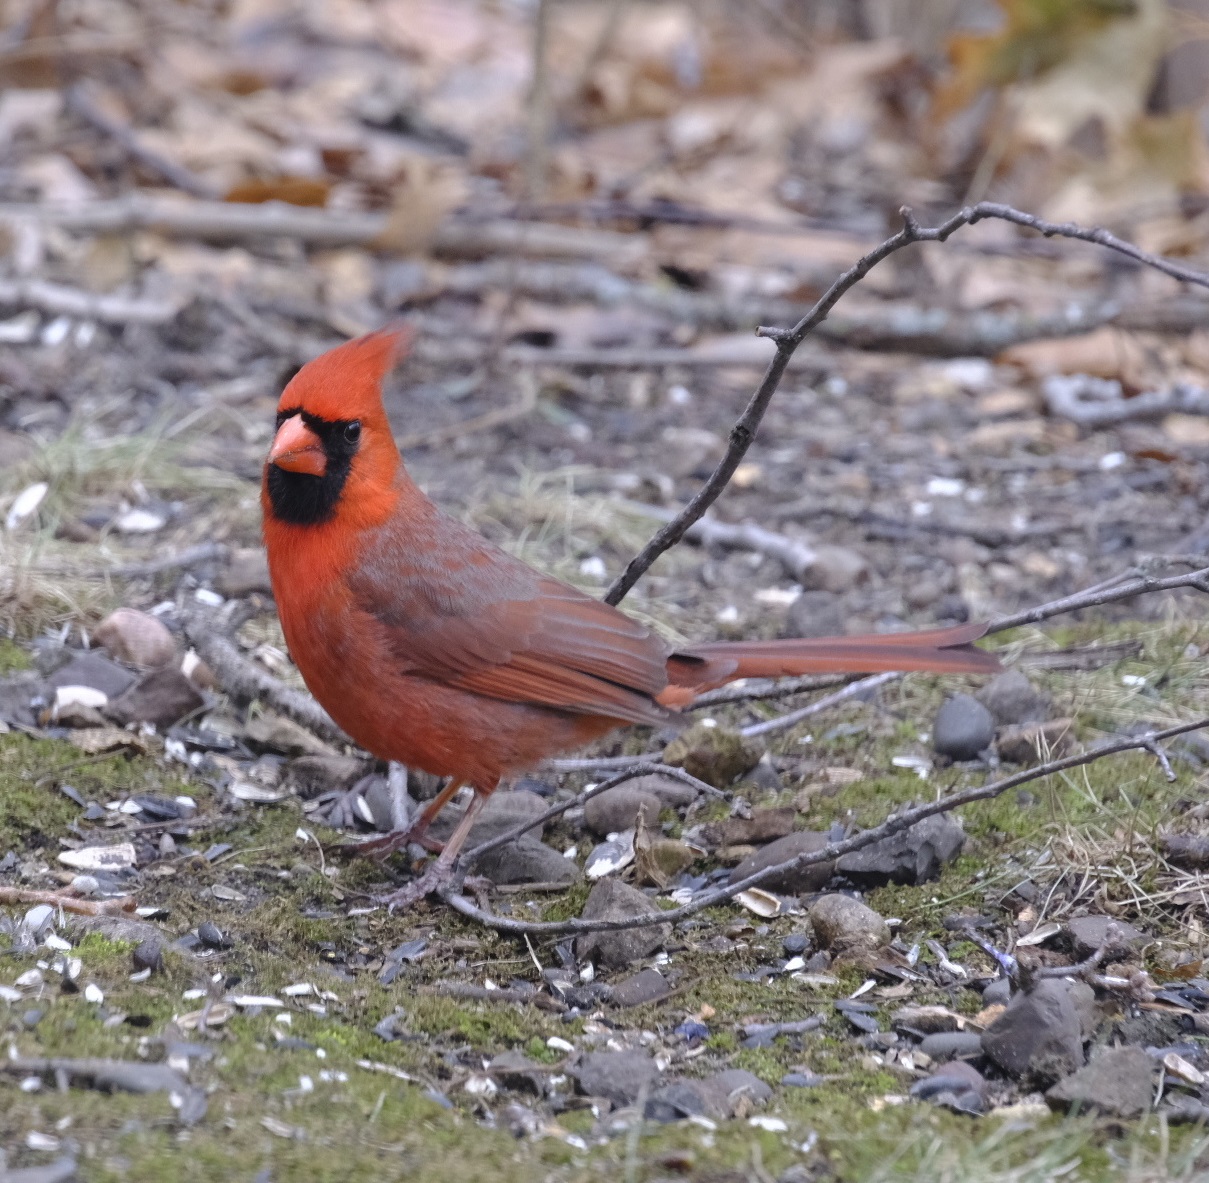 A male northern cardinal is on the ground, looking the direction of the camera. It is bright red with a black mask around its eyes and bill, a pointy crest, and a long tail.